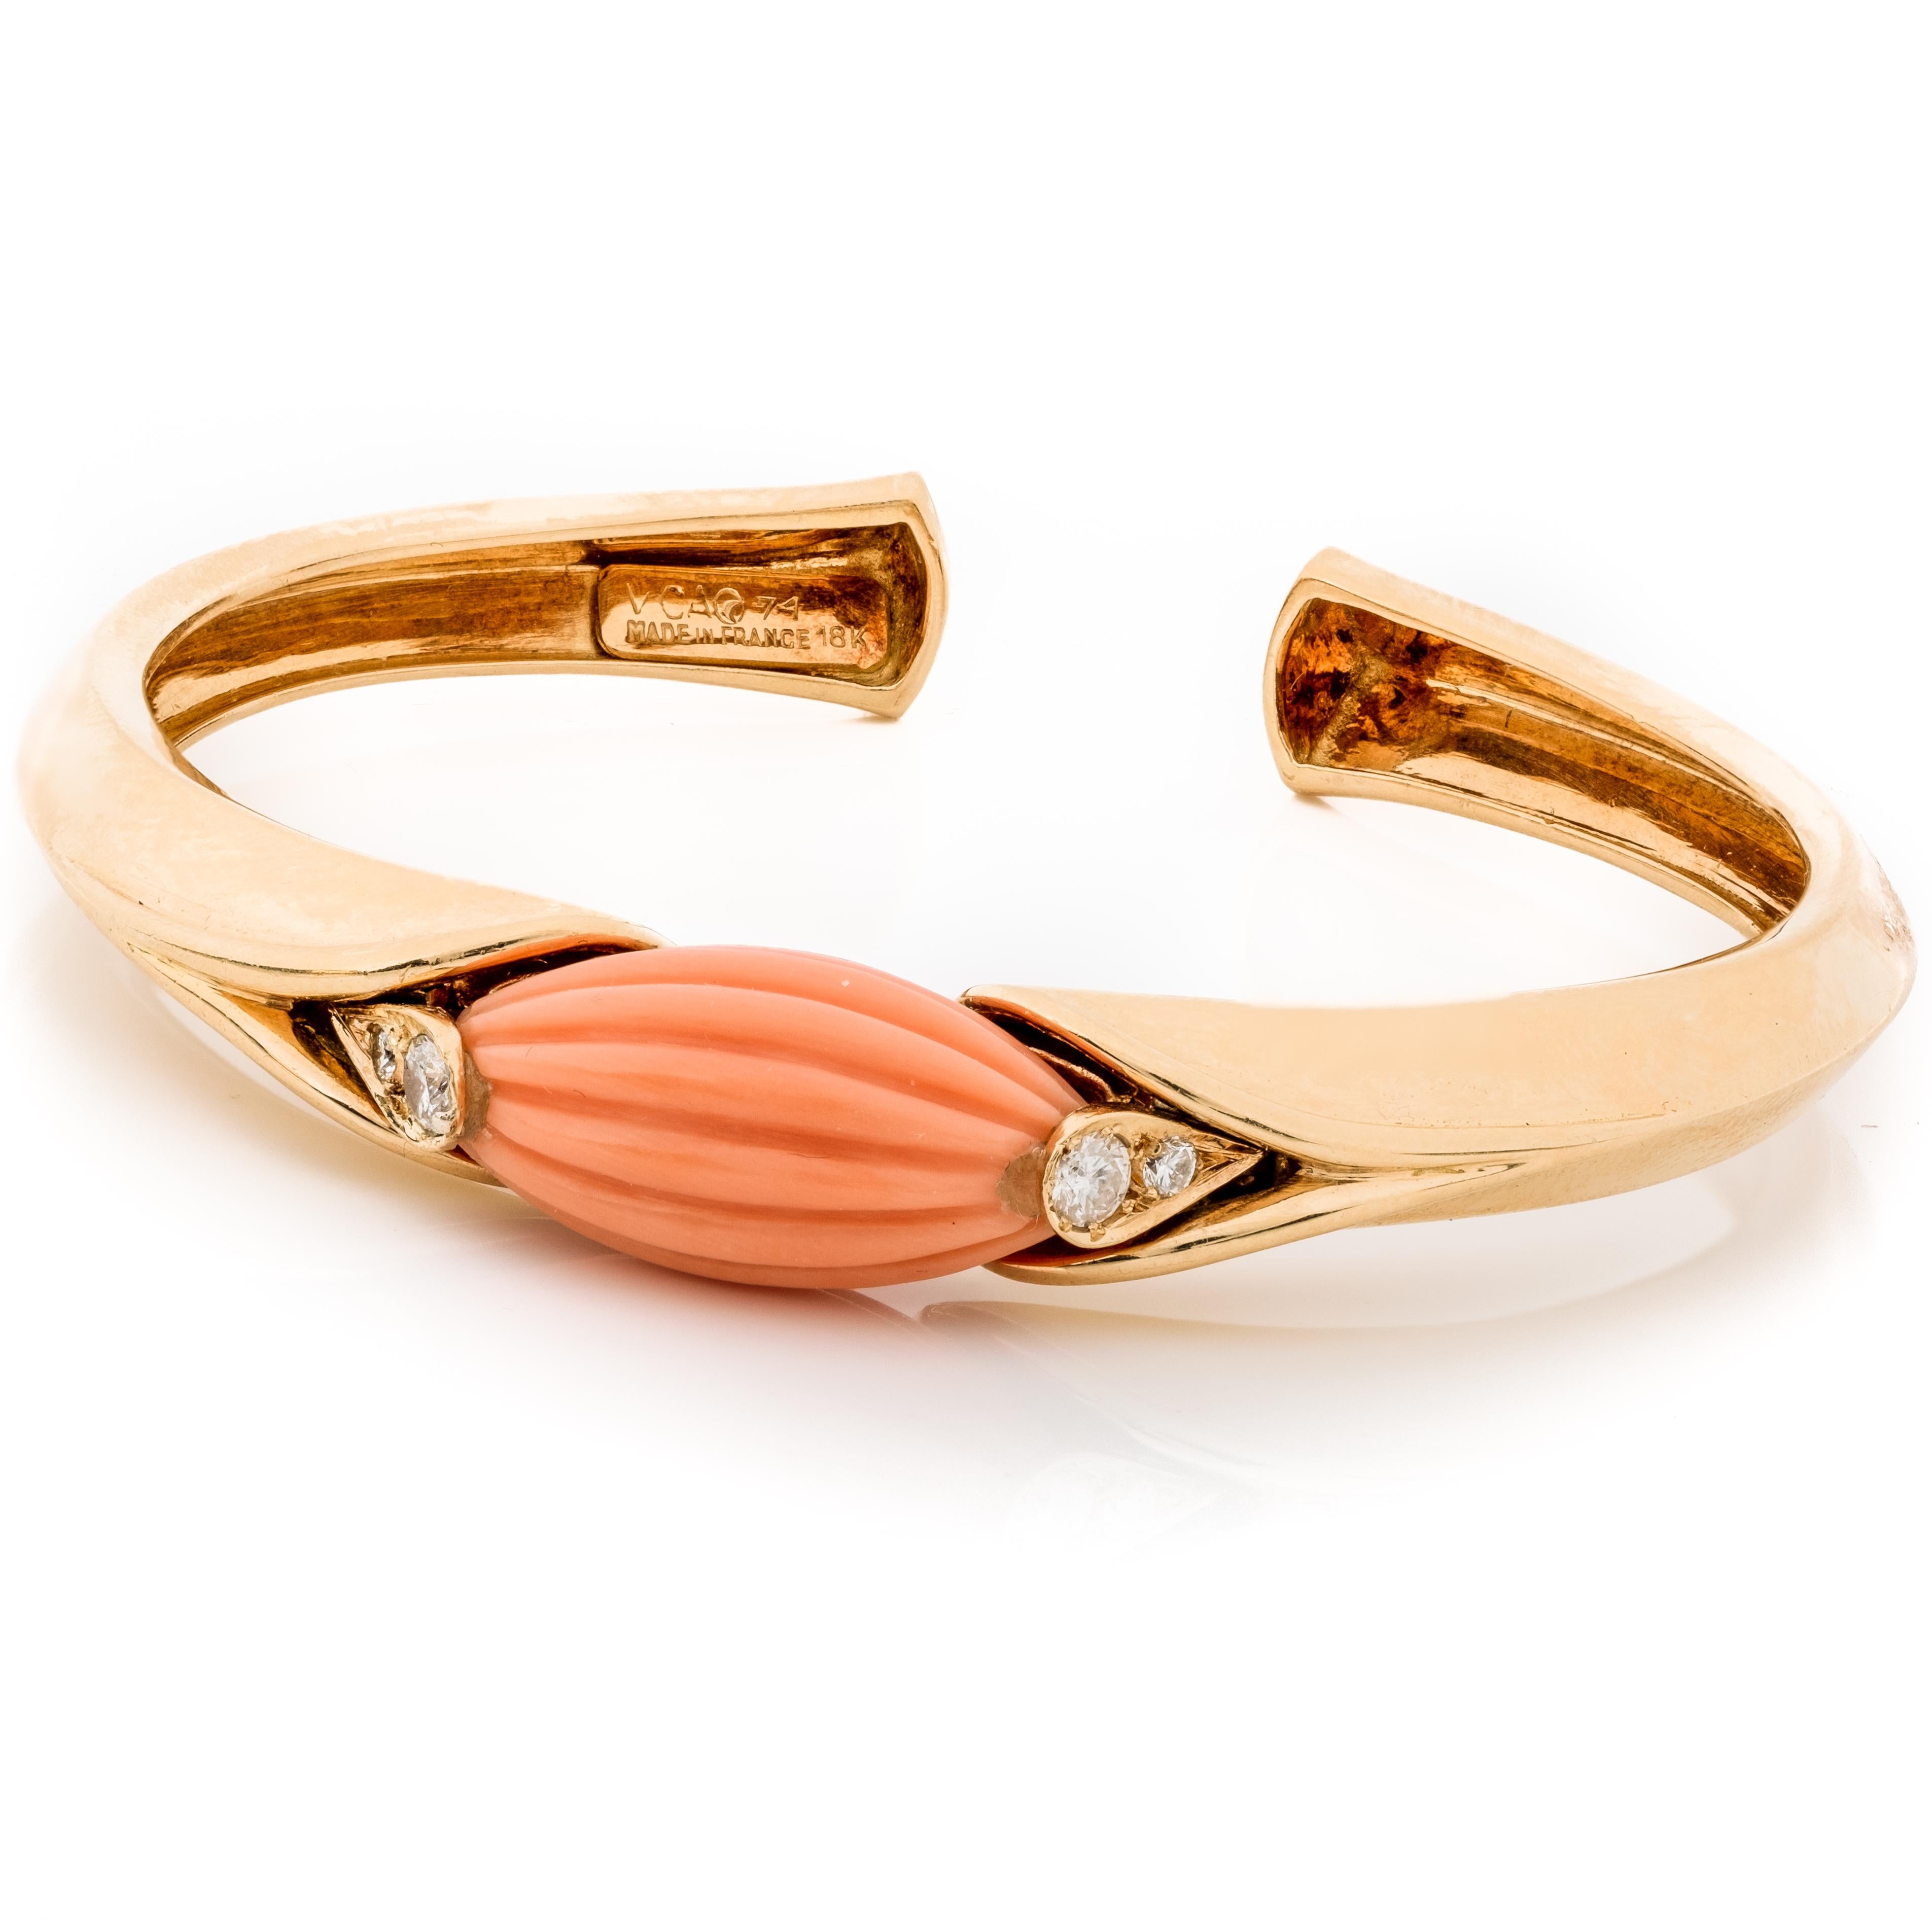 Van Cleef & Arpels 1971 Carved Precious Coral & Solid 18K Yellow Gold Cuff Bracelet W/Diamond Accents - This lovely vintage cuff bracelet comes from one of the world's foremost designers of high-caliber luxury jewelry, Van Cleef & Arpels. The